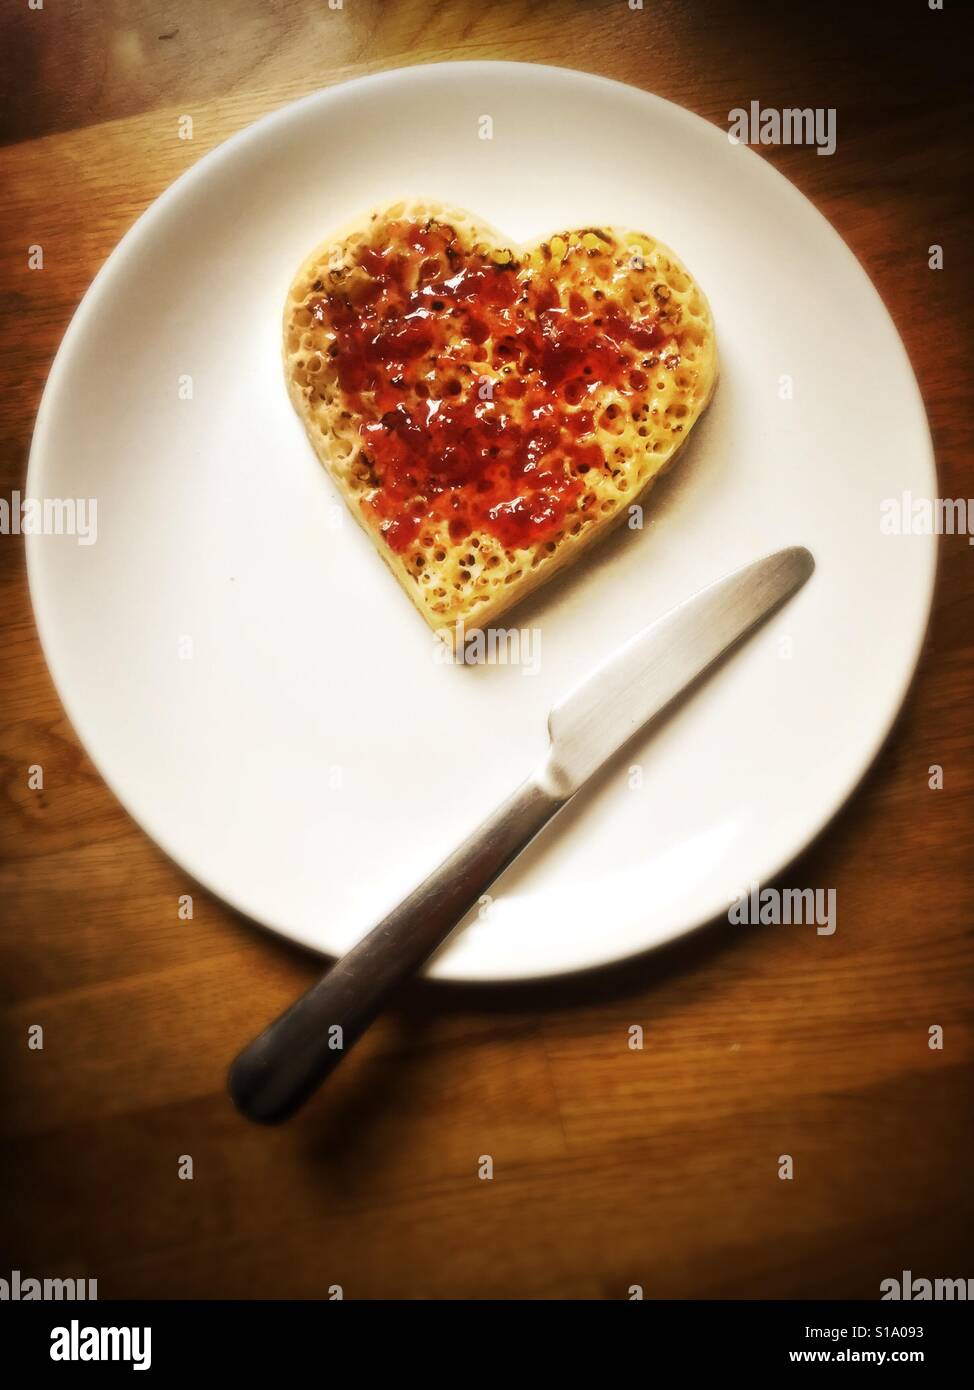 A heart-shaped crumpet covered with strawberry jam during Valentine's Day Stock Photo